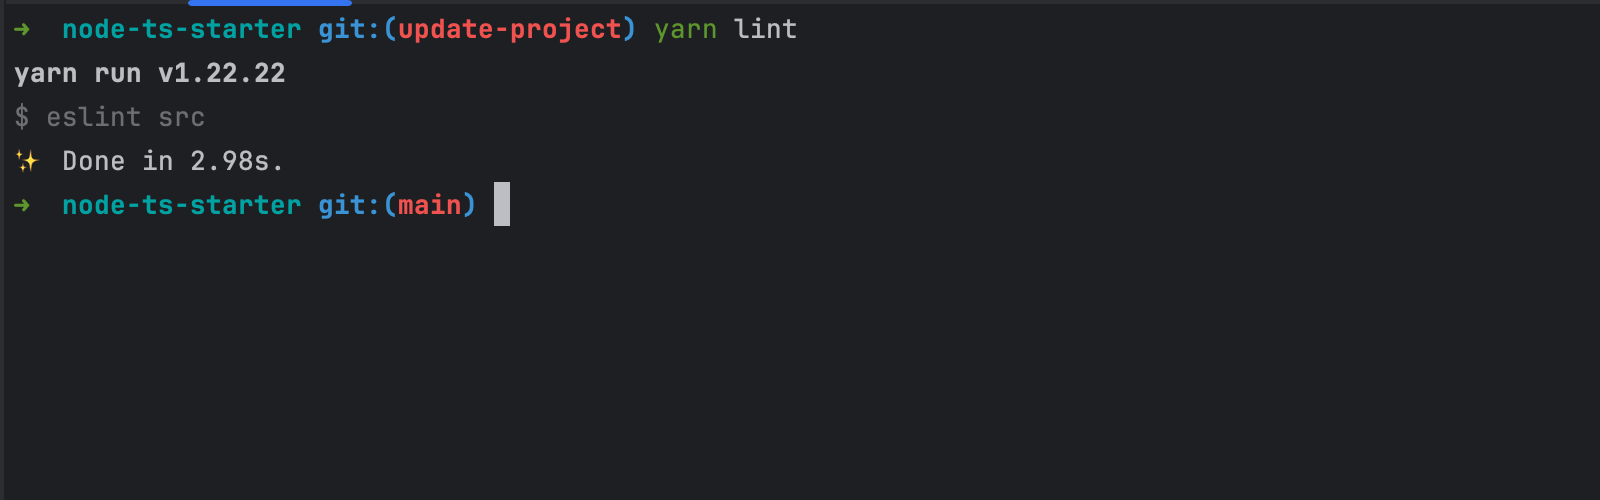 Linting the project's code with ESLint.